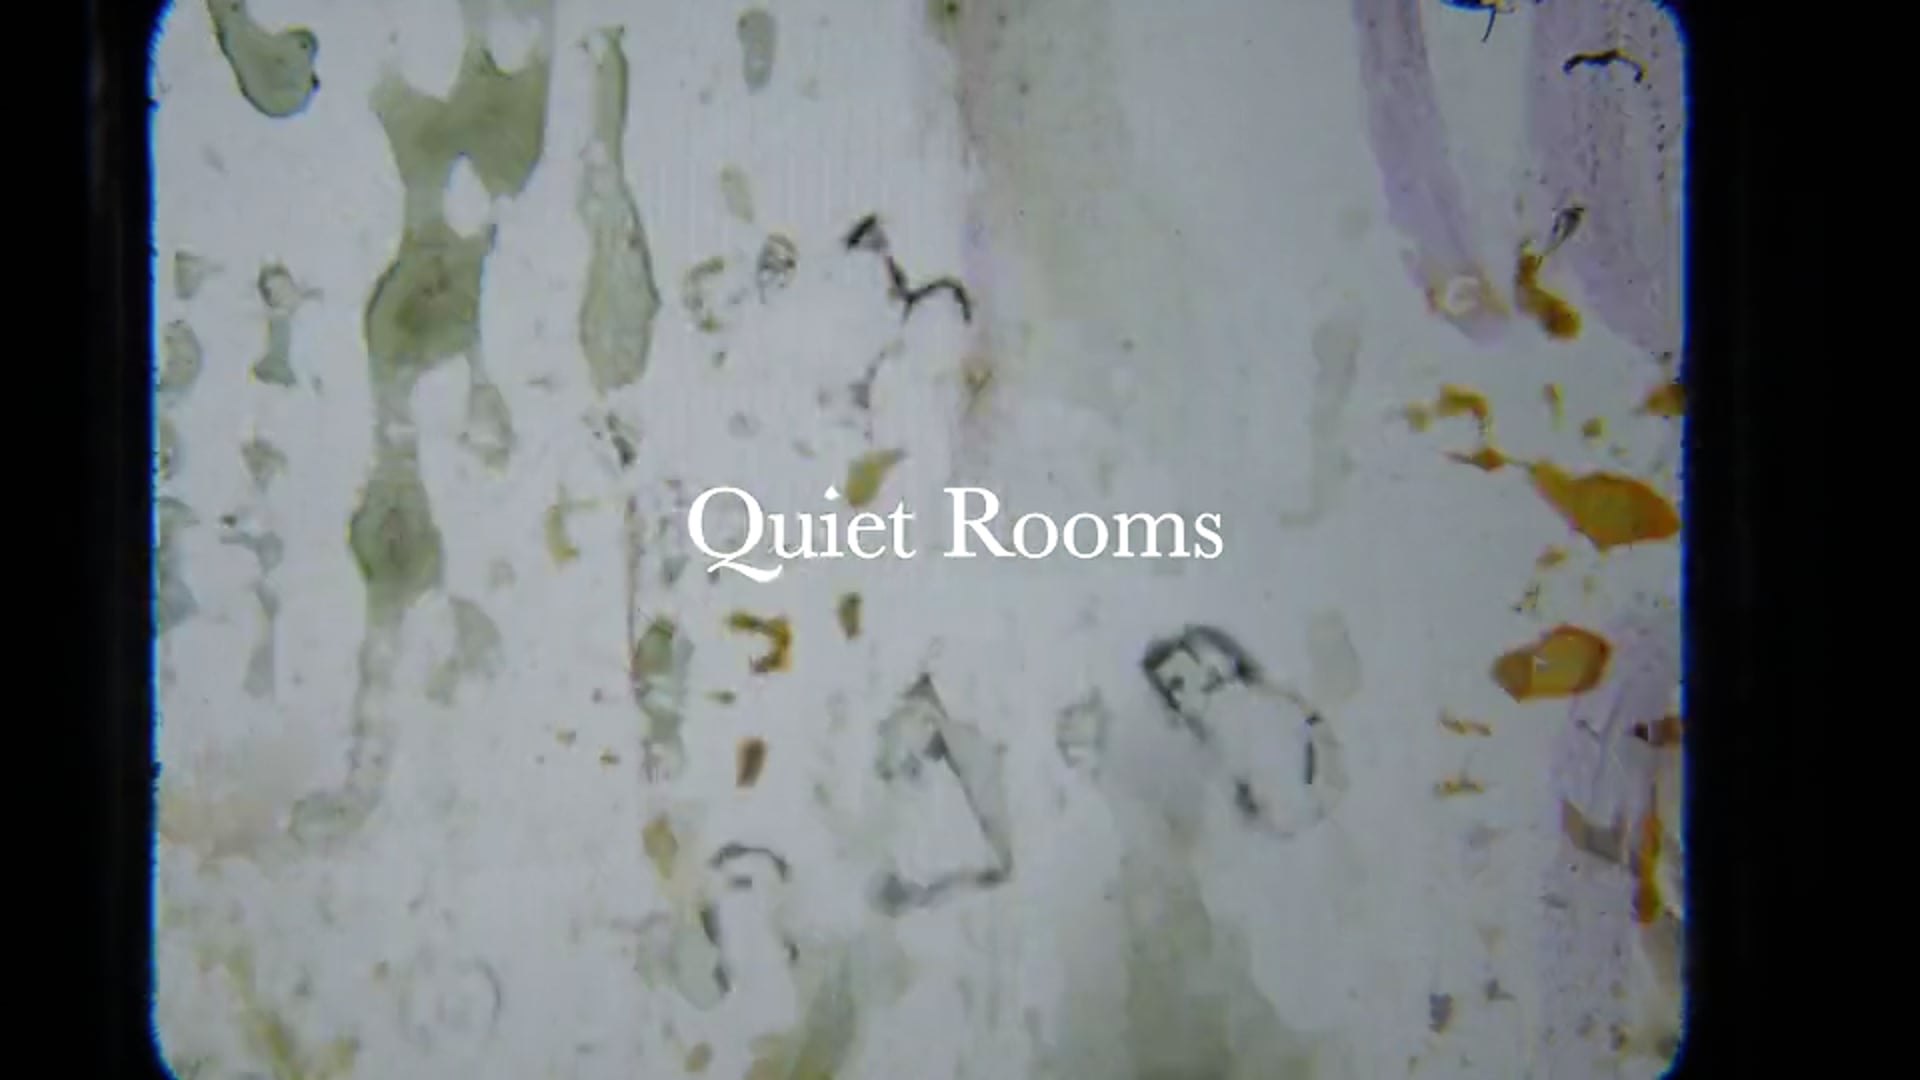 Thumbnail image for video with title "Quiet Rooms"